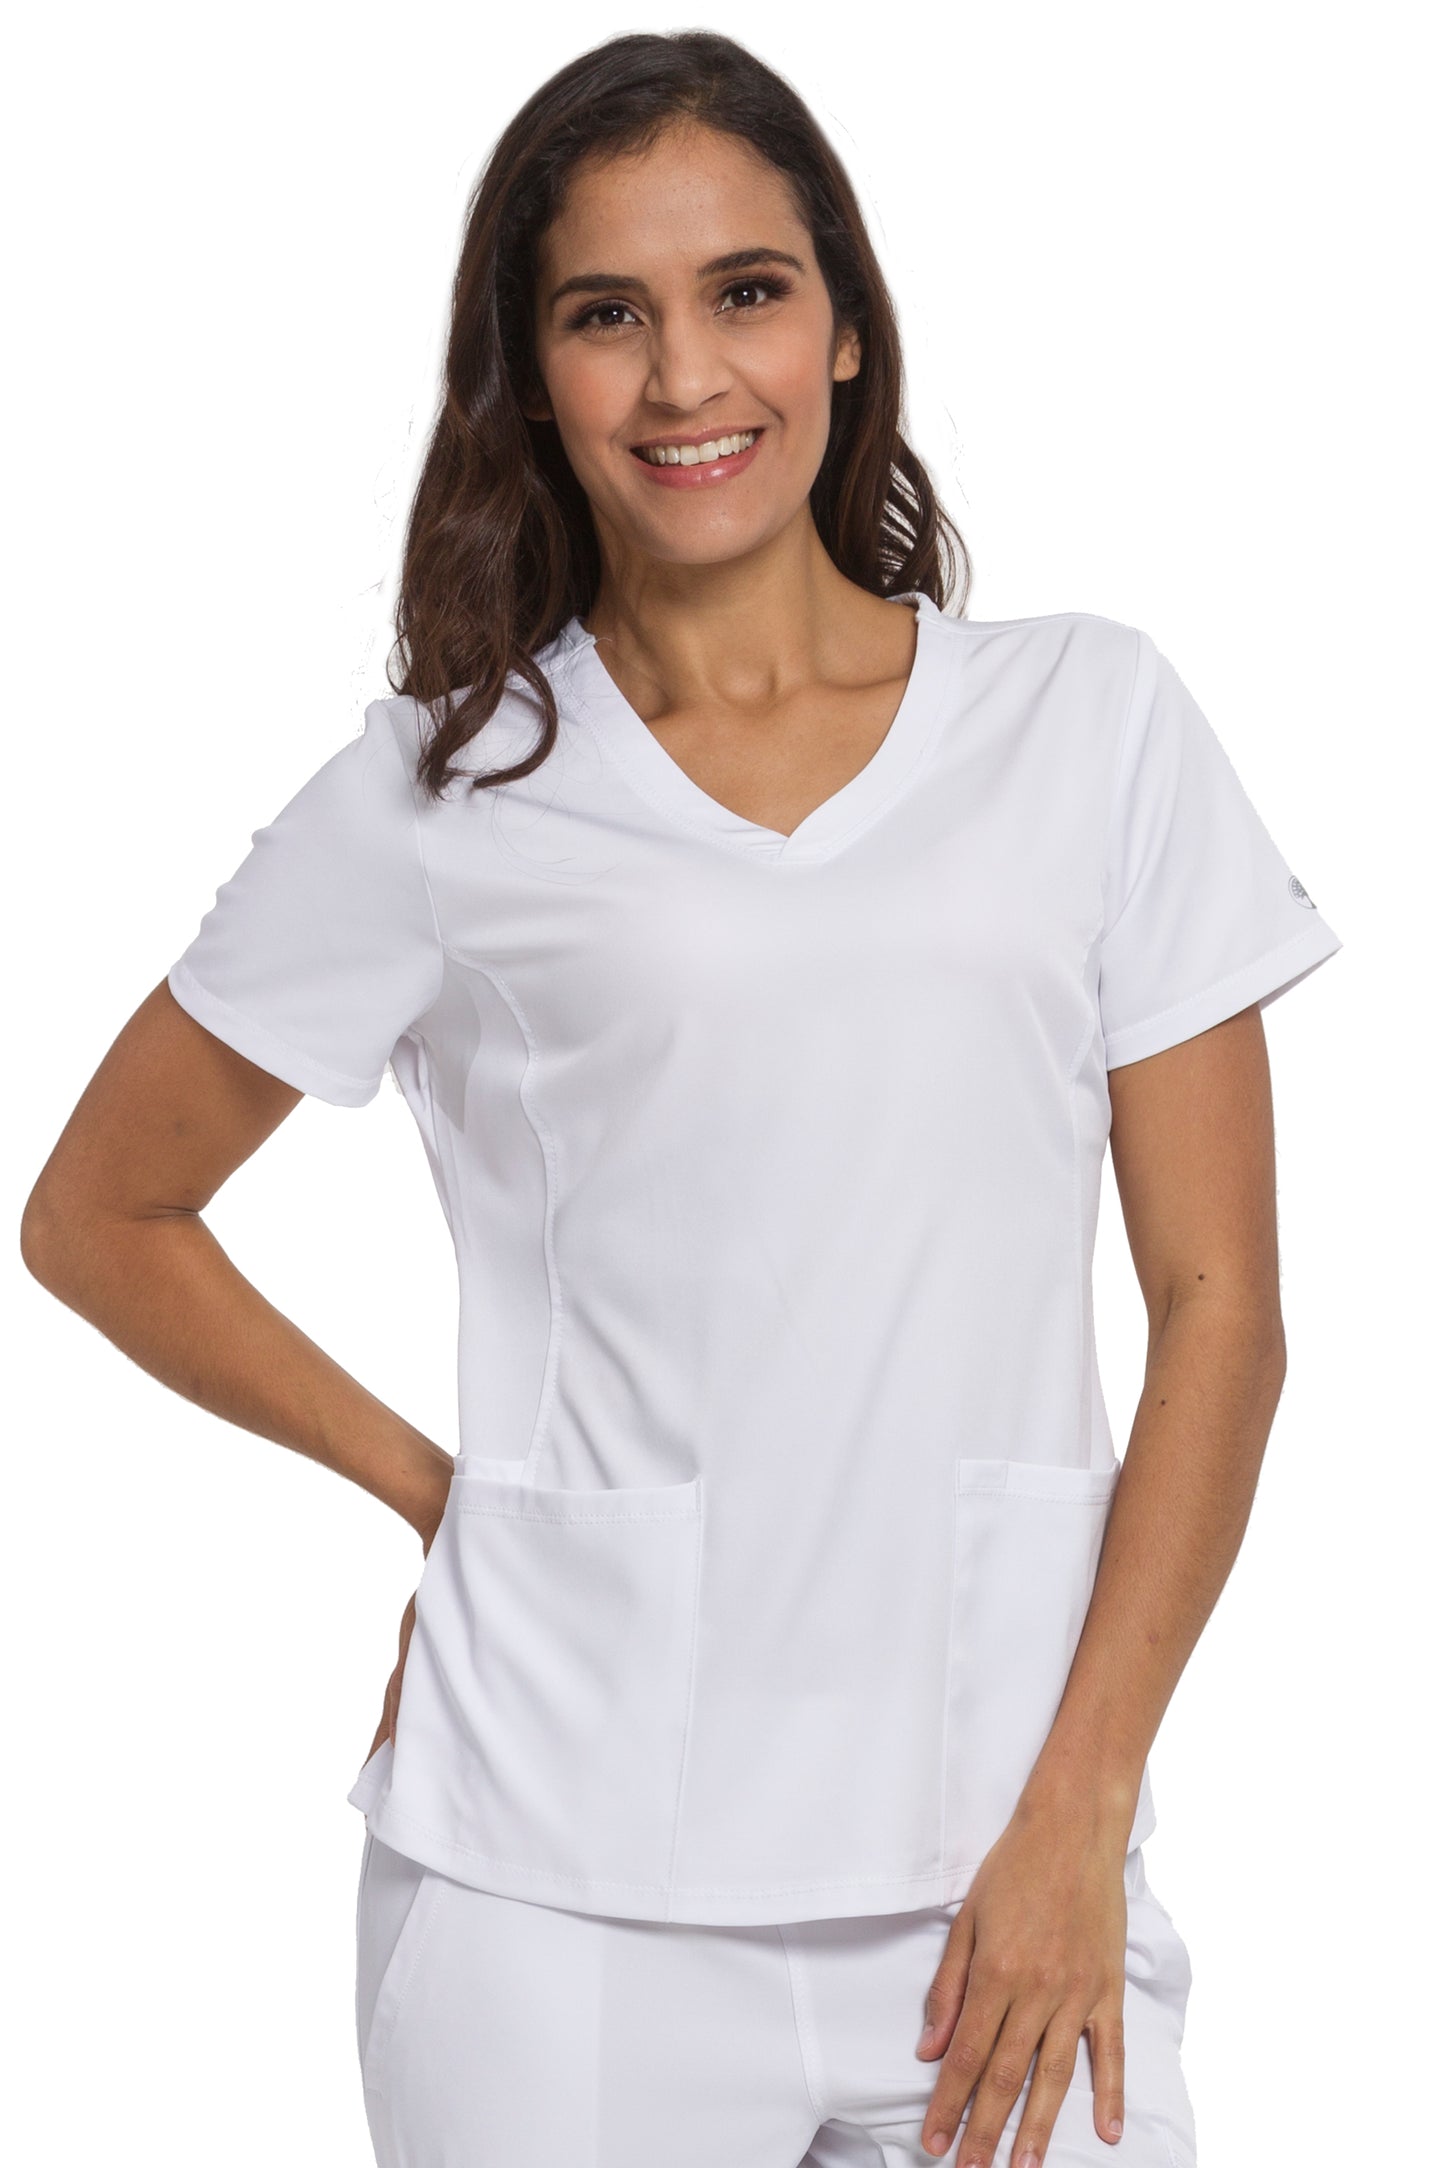 Healing Hands HH Works Monica V-Neck Scrub Top in White at Parker's Clothing and Shoes